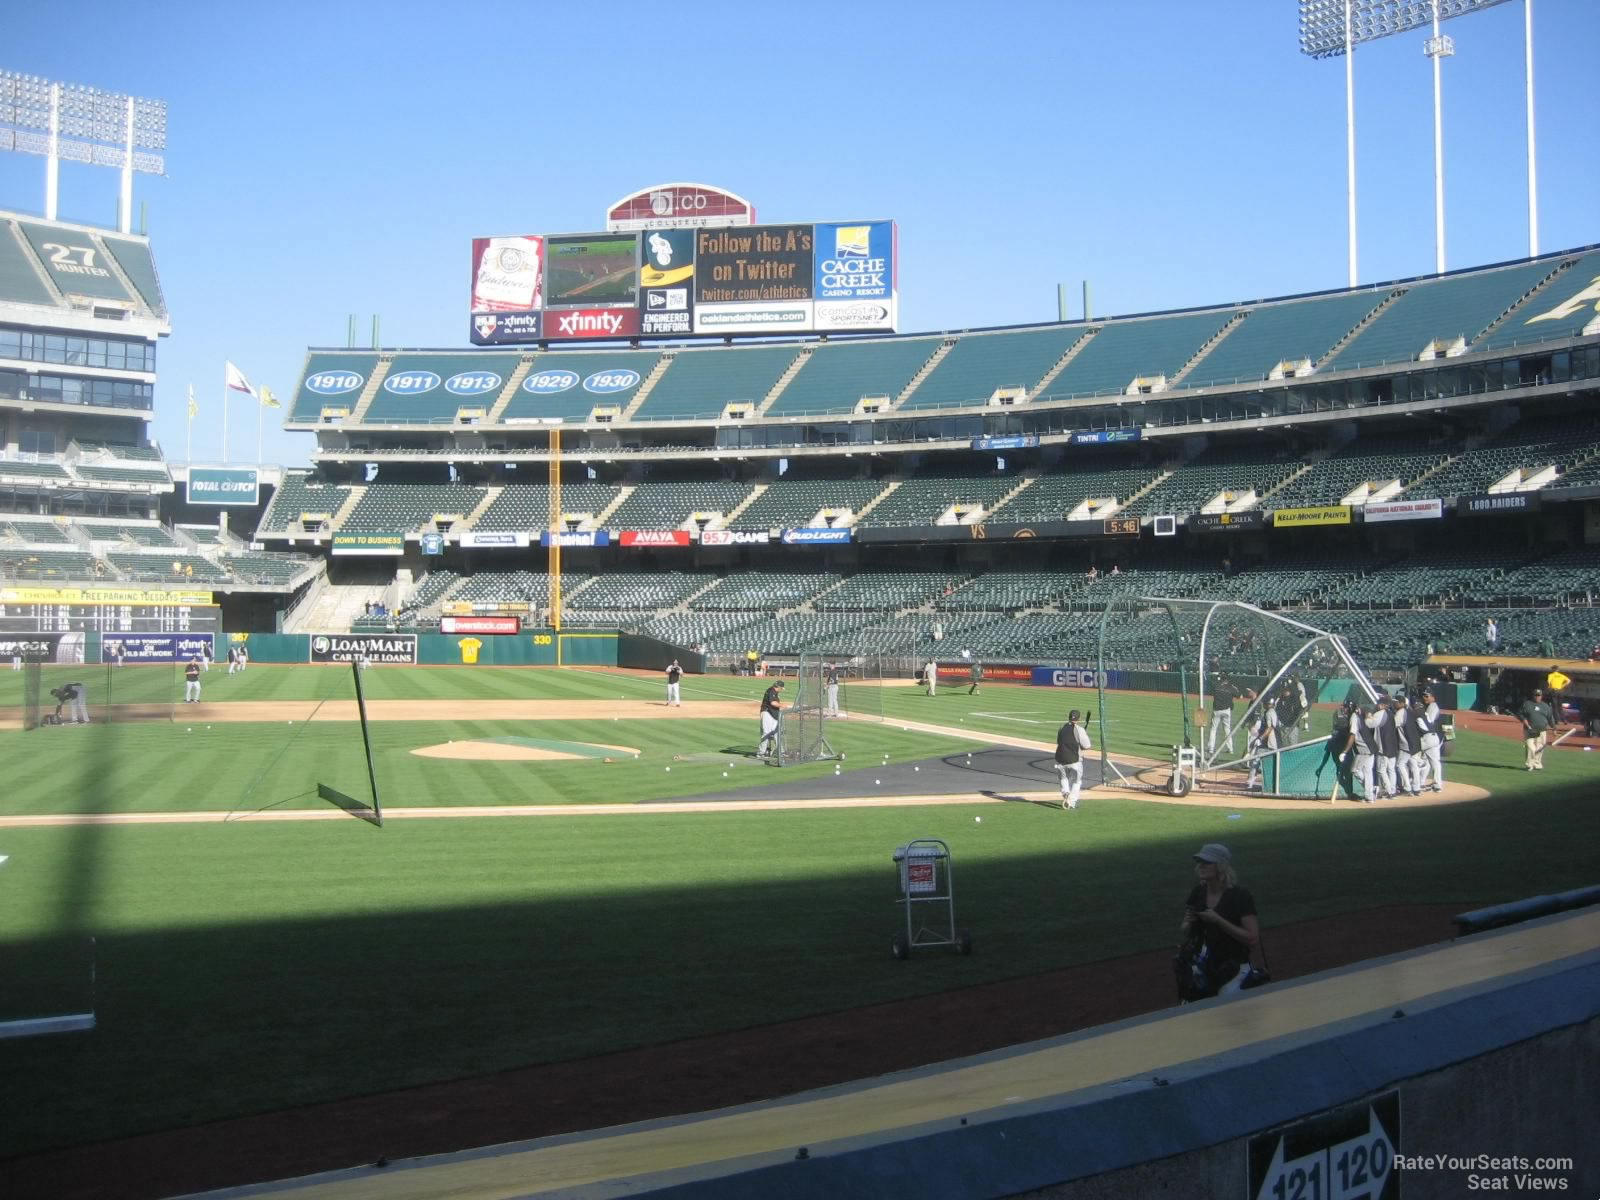 View from Section 121 Row 8 at Oakland Coliseum